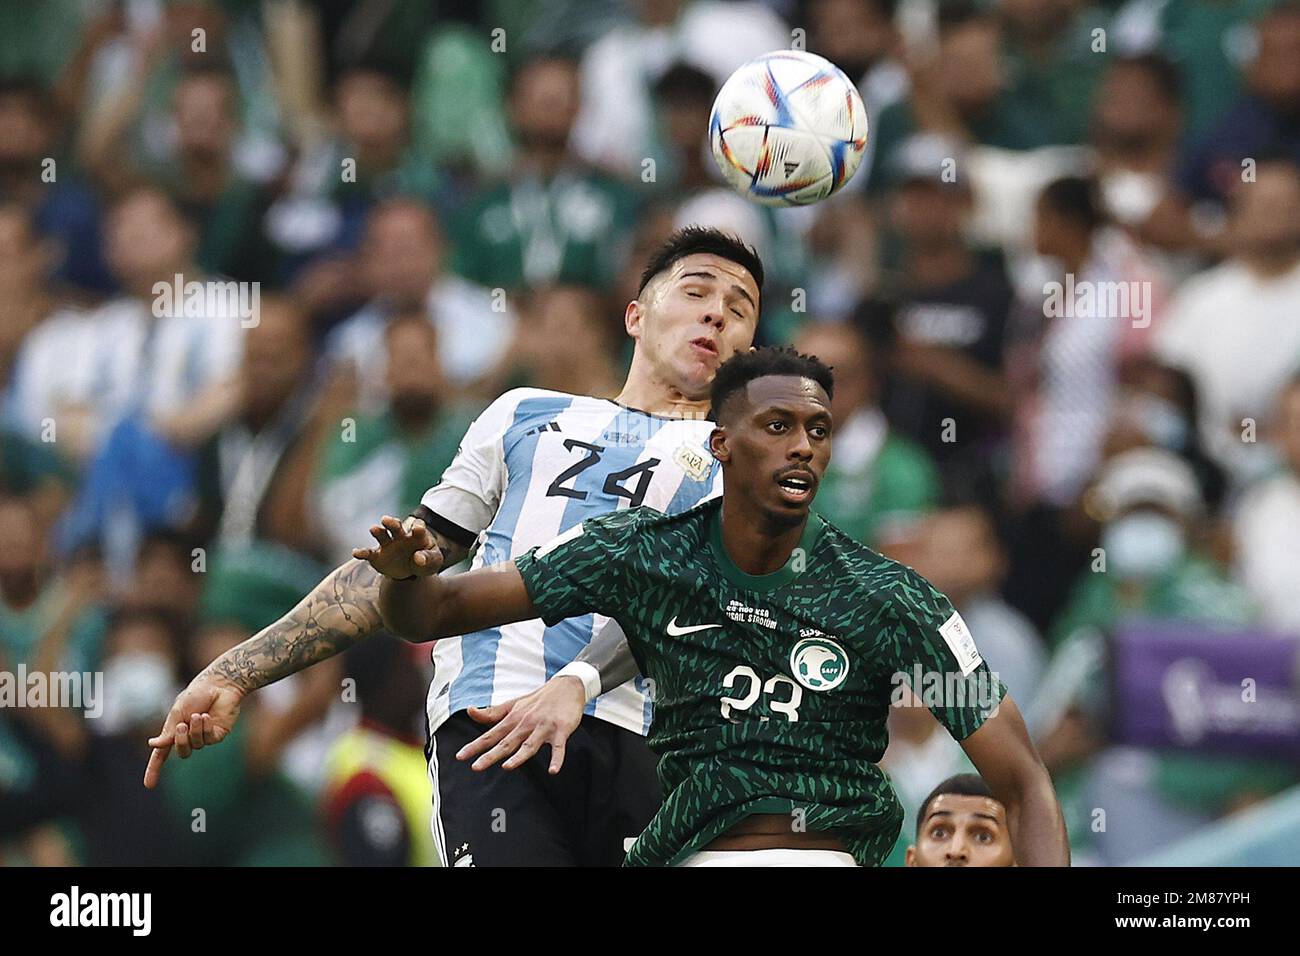 LUSAIL CITY - (LR) Enzo Fernandez of Argentina, Mohamed Kanno of Saudi Arabia during the FIFA World Cup Qatar 2022 group C match between Argentina and Saudi Arabia at Lusail stadium on November 22, 2022 in Lusail City, Qatar. AP | Dutch Height | MAURICE OF STONE Stock Photo